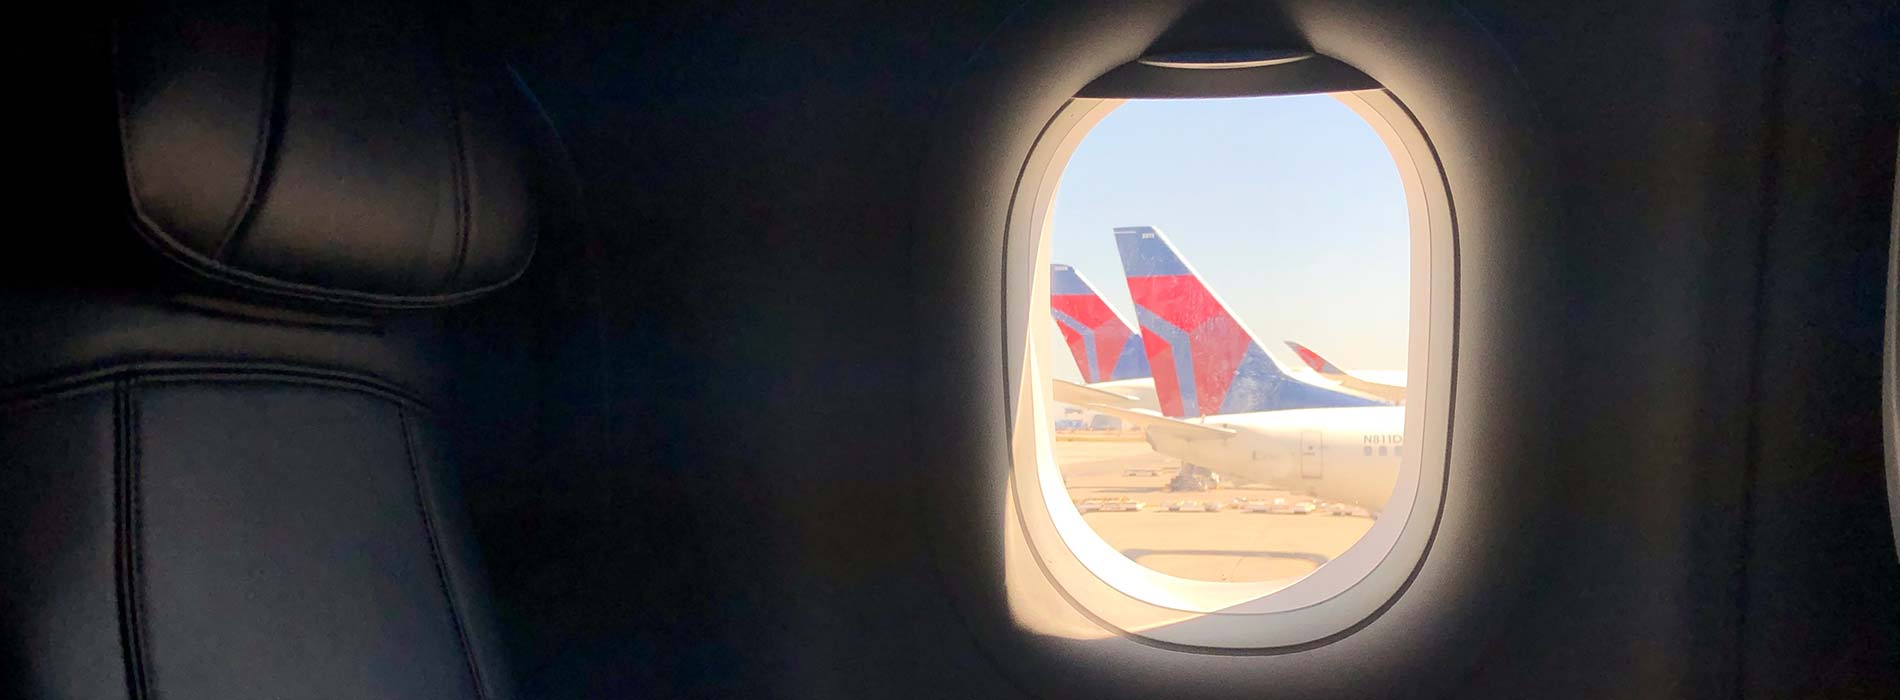 A row of seats on an airplane, the tail of a Delta airplane on the ground out the window.